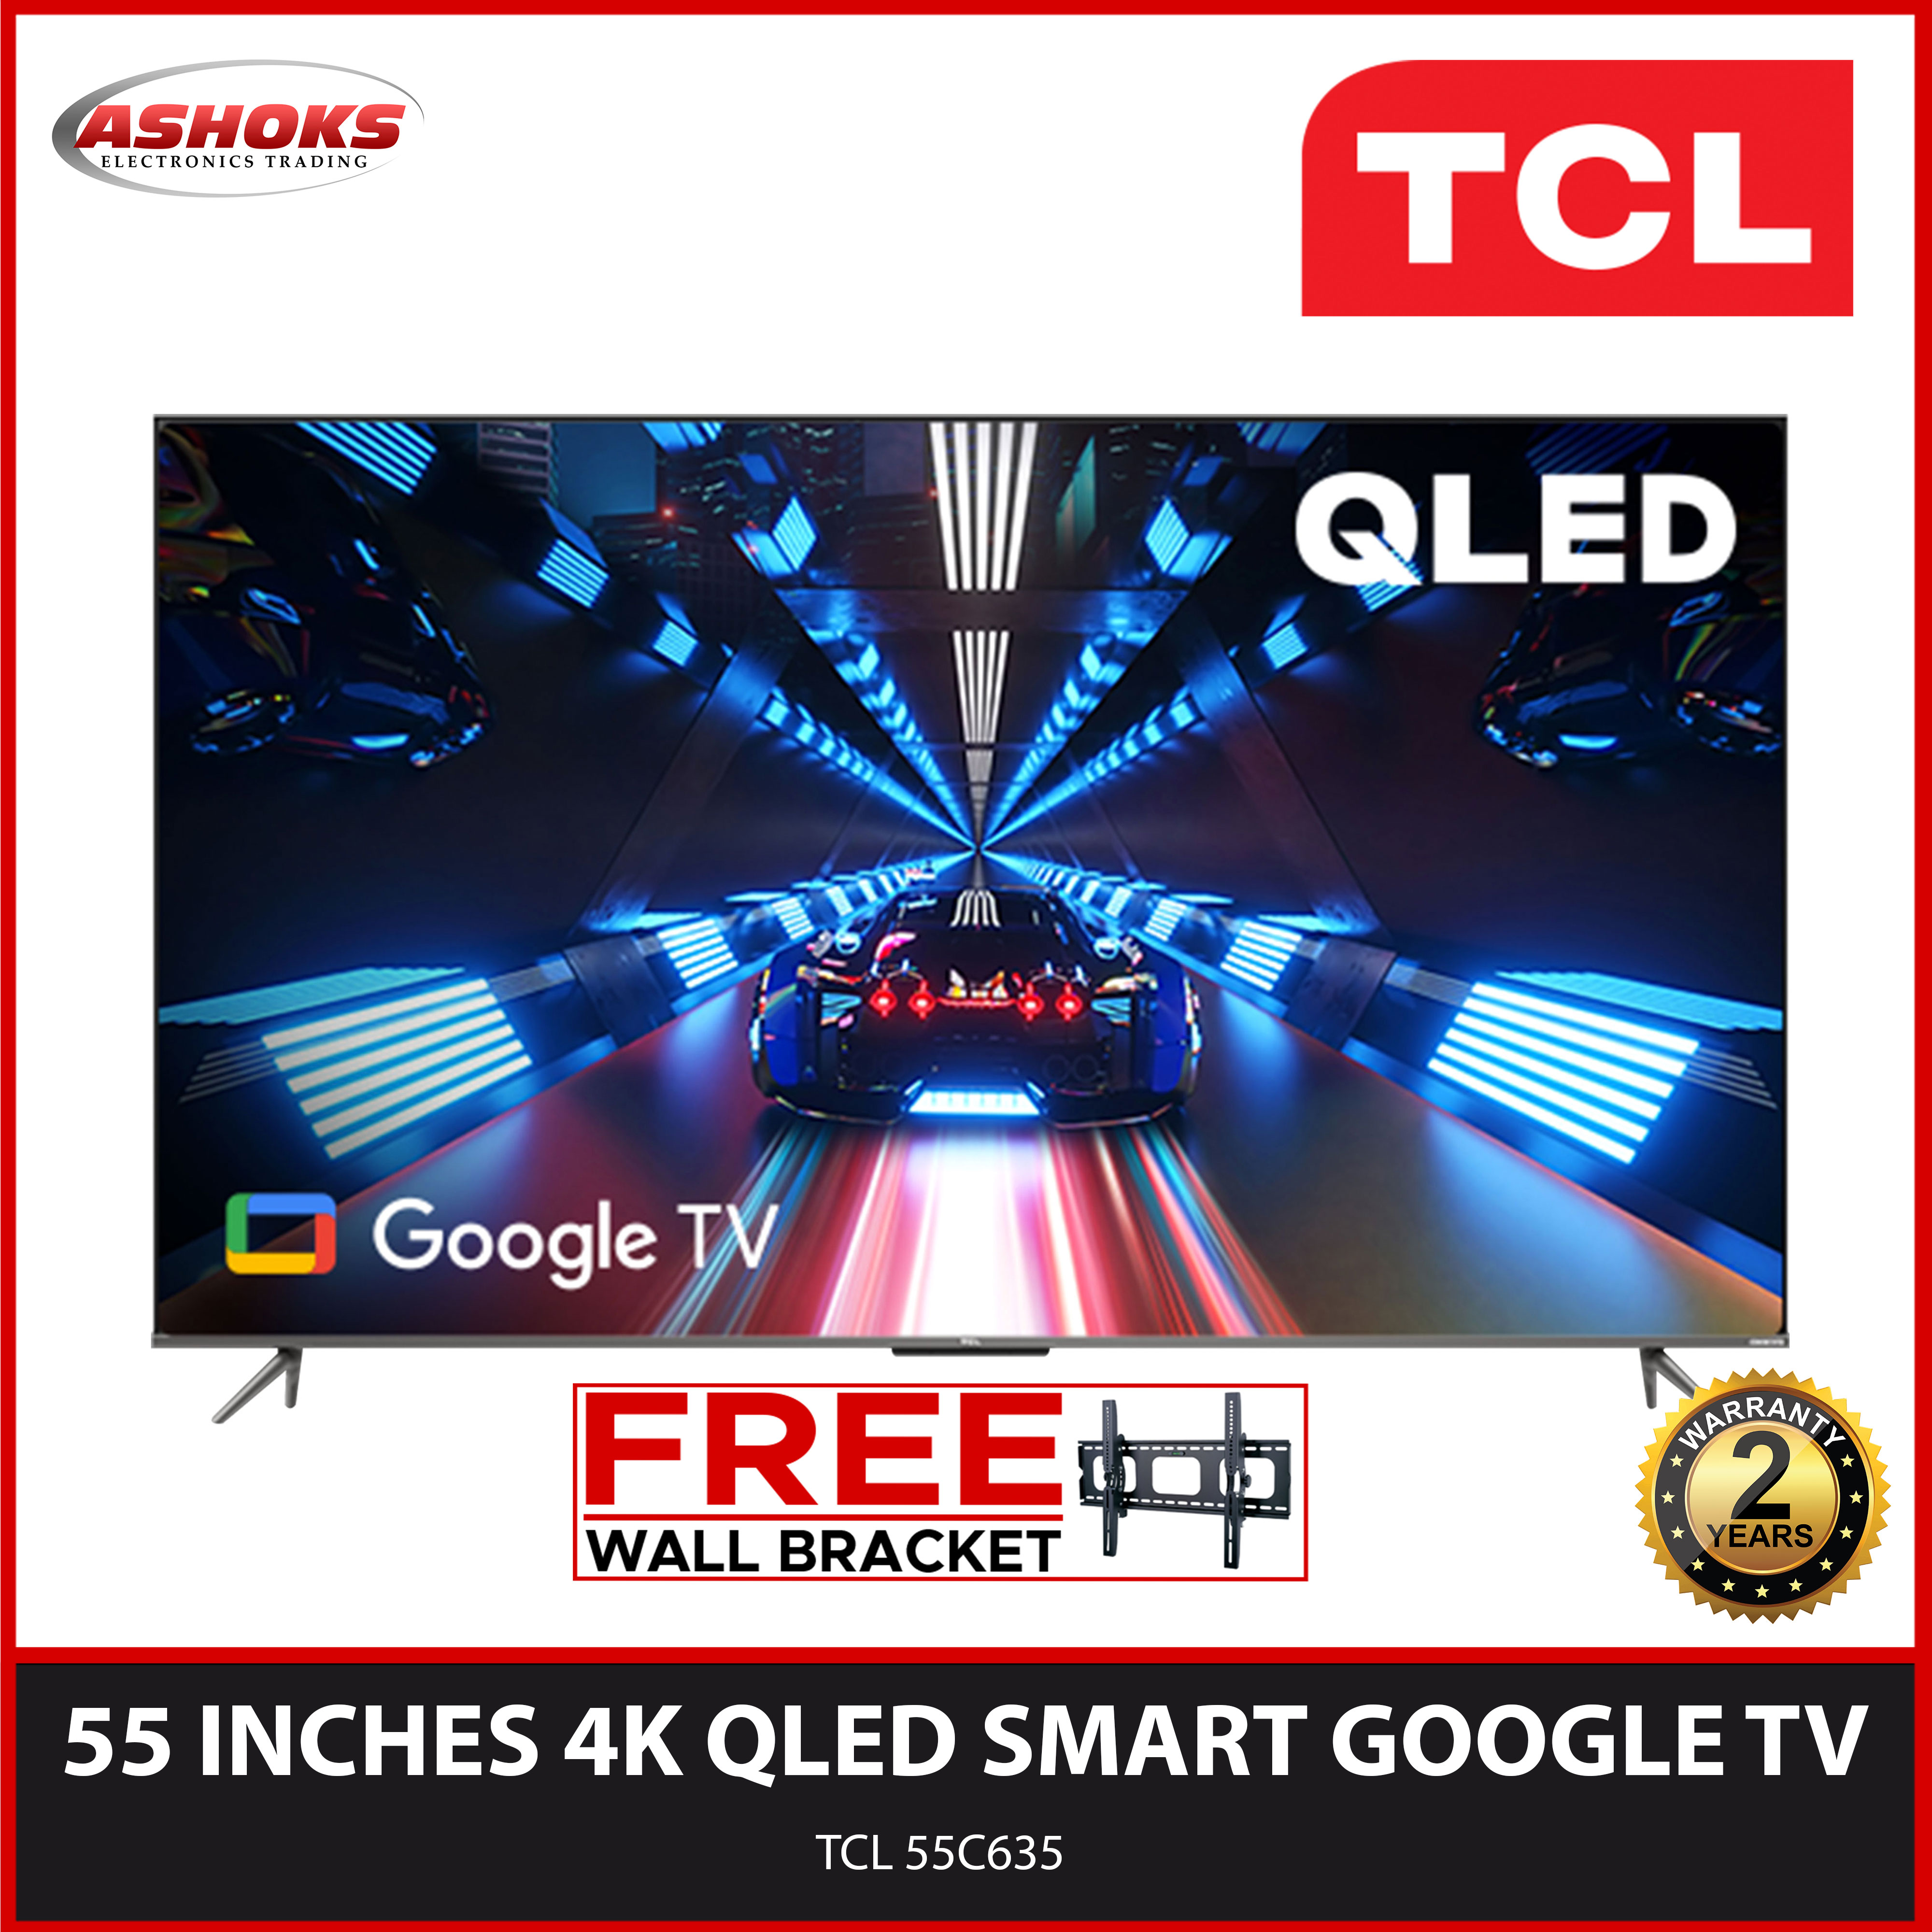 TCL 55C635 4K QLED TV with Google TV and Game Master